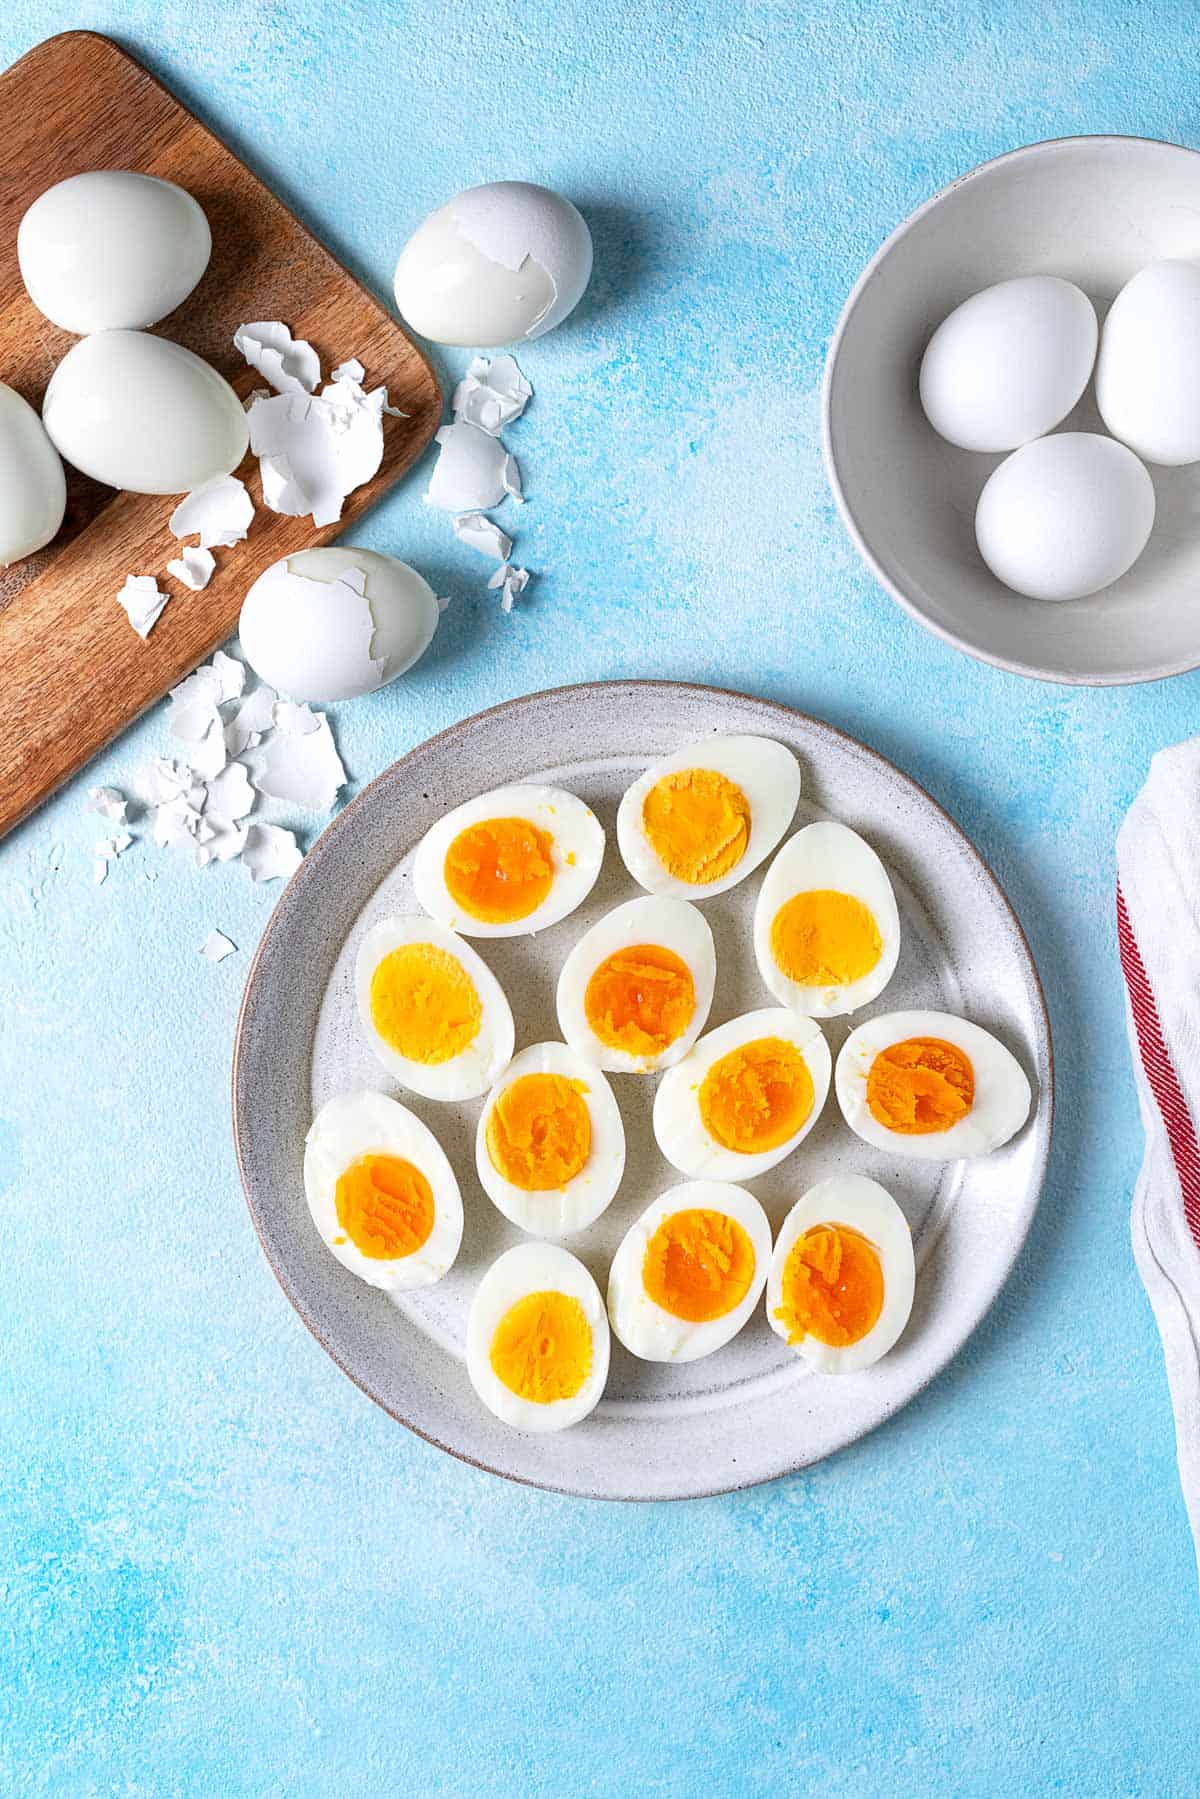 How to Make Perfect Hard-Boiled Eggs (My Favorite Method)